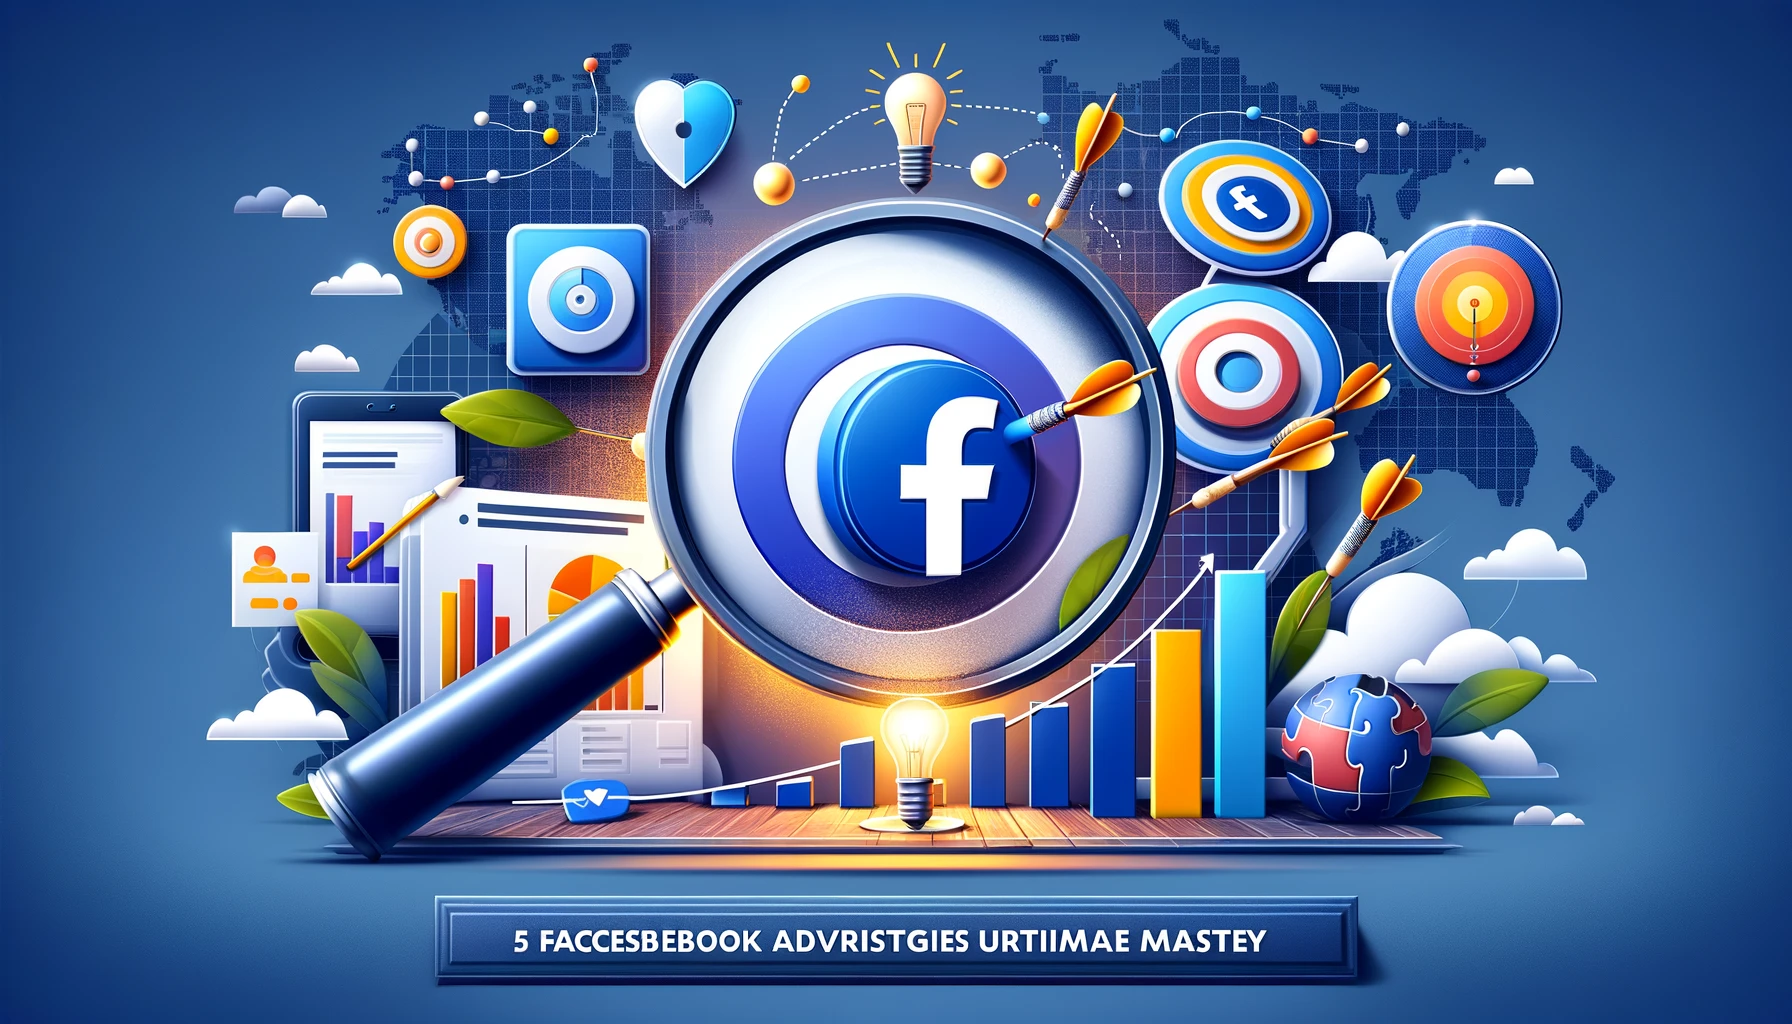 A dynamic visual representation of Facebook advertising strategies, featuring a magnifying glass on a Facebook logo, rising metrics chart, a bullseye with darts, a bright idea light bulb, and a completing puzzle piece, all set against an innovative and successful theme backdrop.